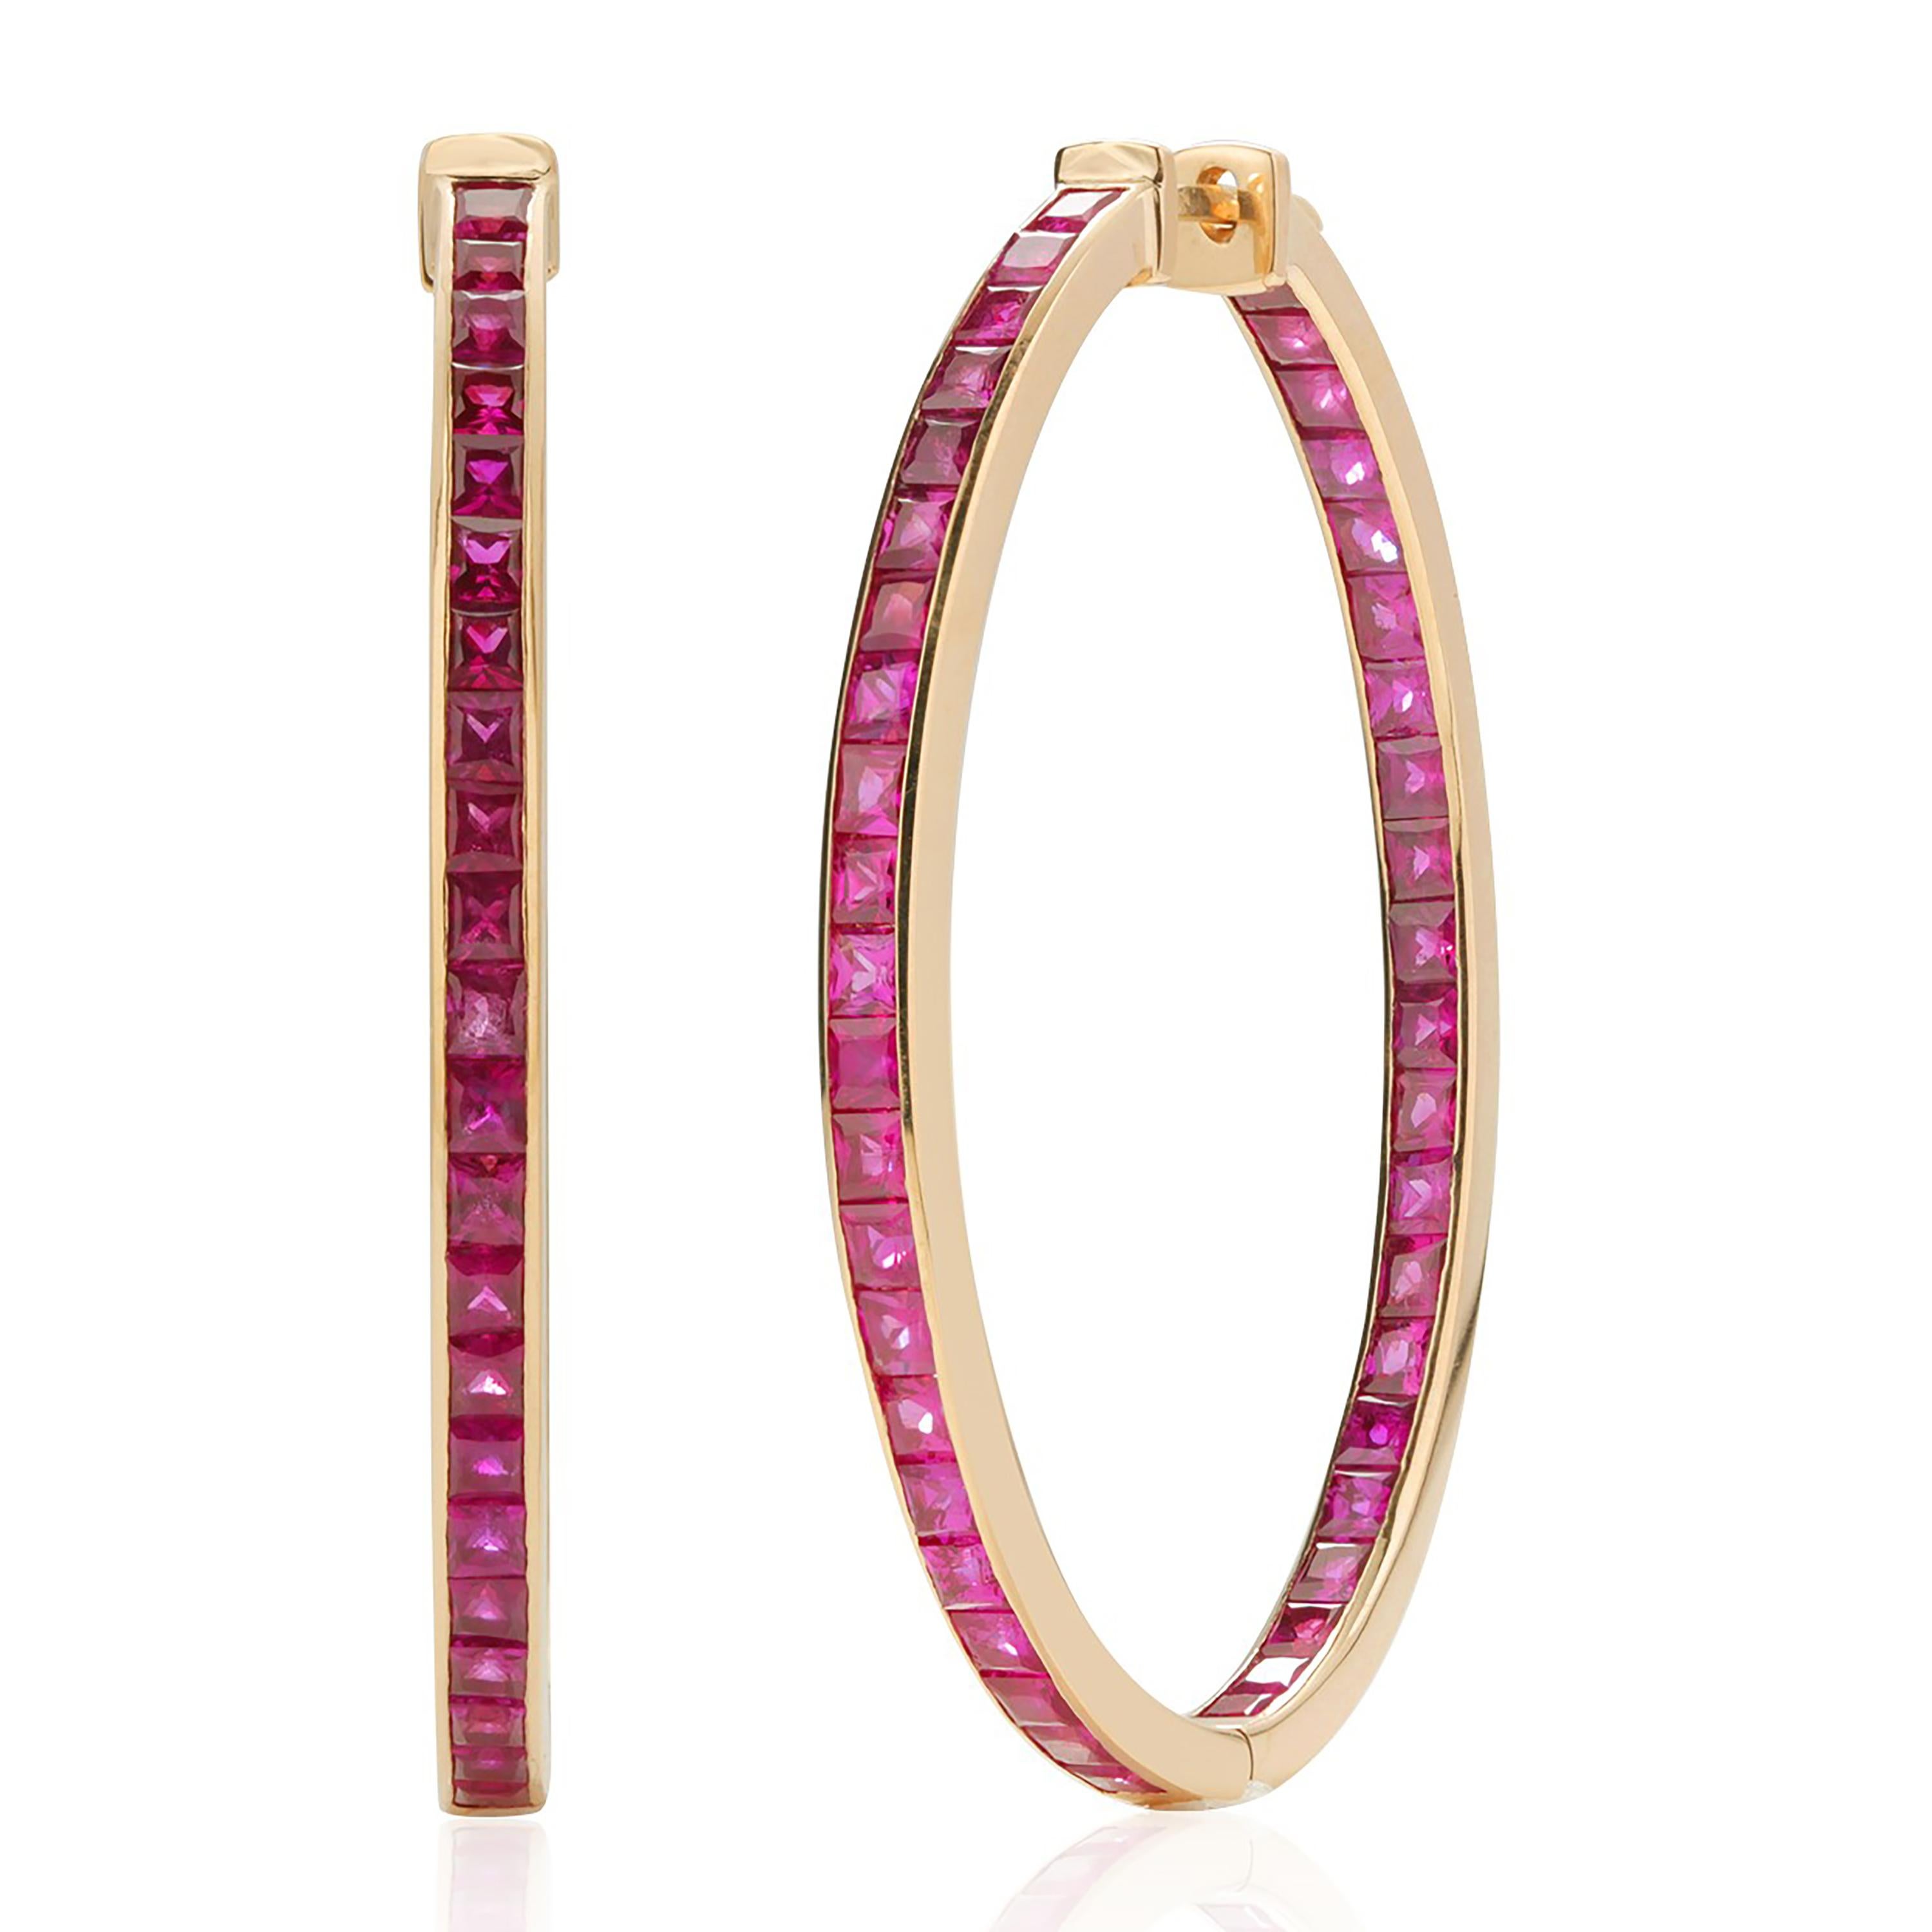 Inside Out 12 Carat Princess Burma Rubies 2 Inch Long Yellow Gold Hoop Earrings  In New Condition For Sale In New York, NY